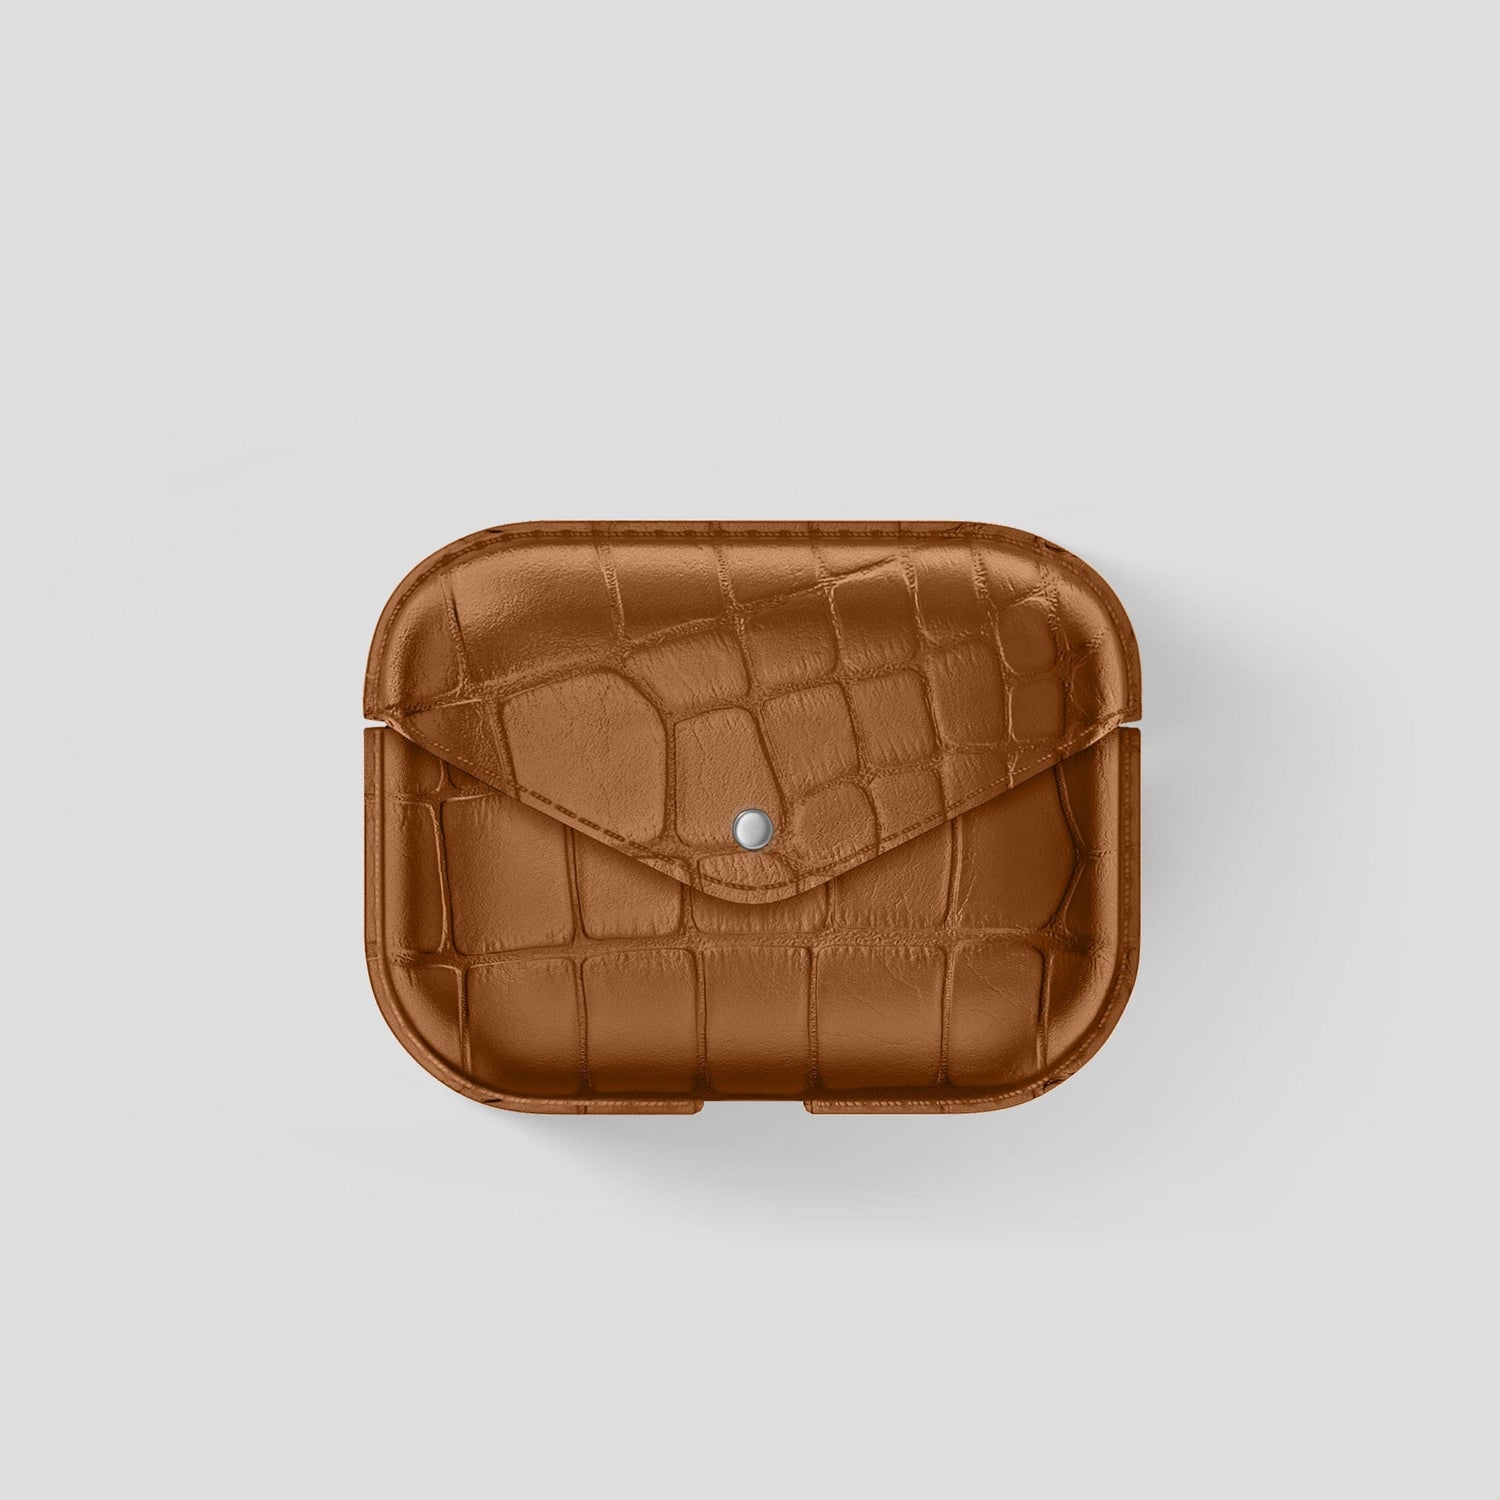 case for airpods pro 2 generation lv